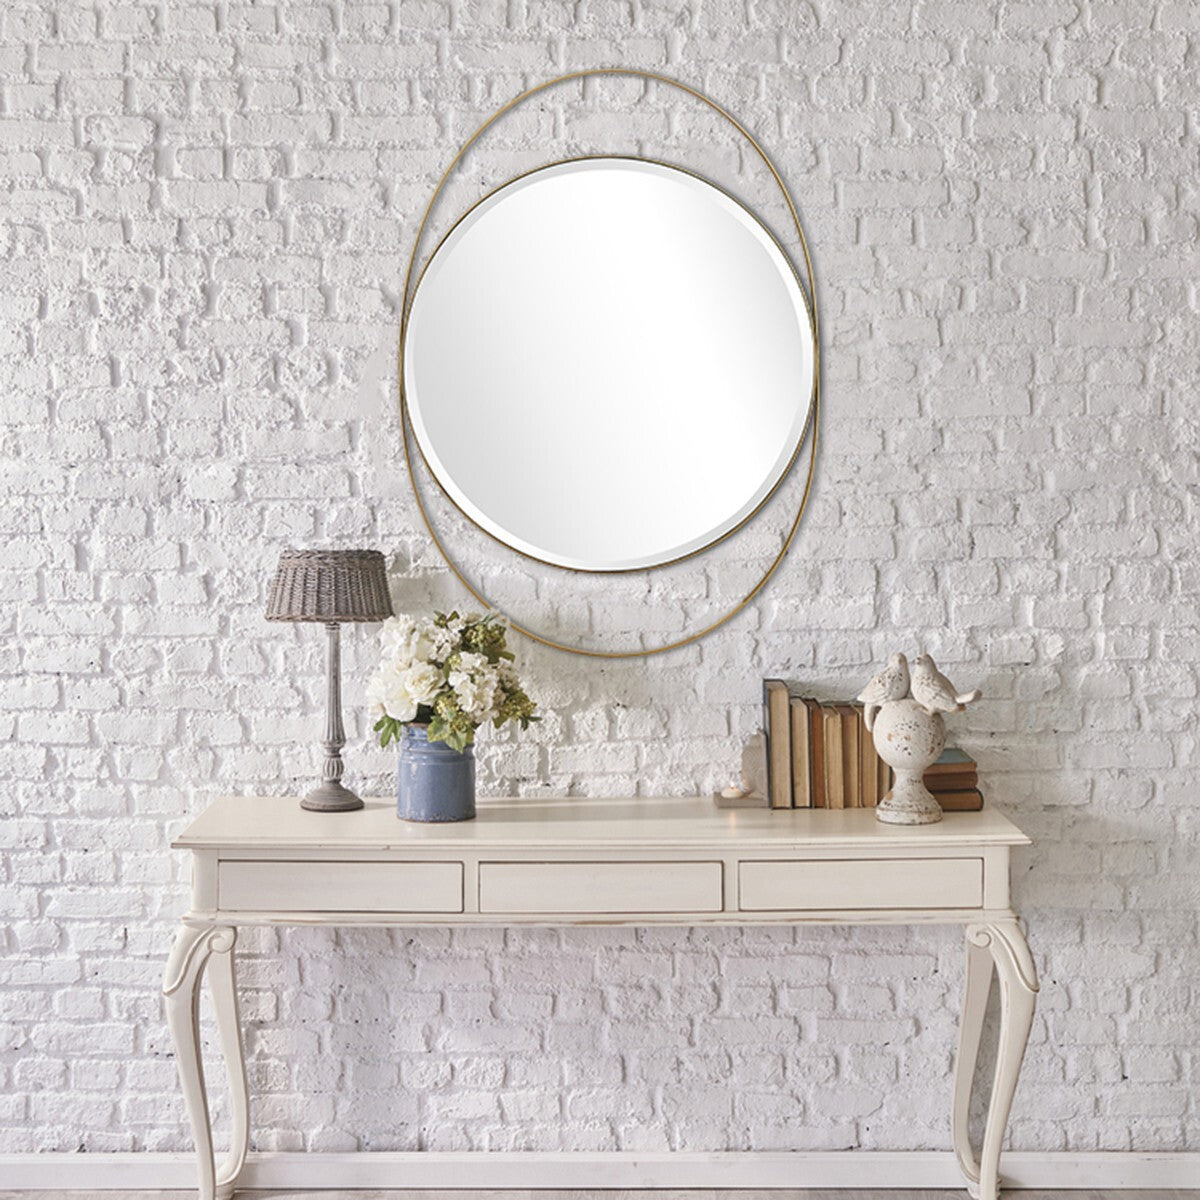 39" Painted Oval Accent Mirror Wall Mounted With Metal Frame